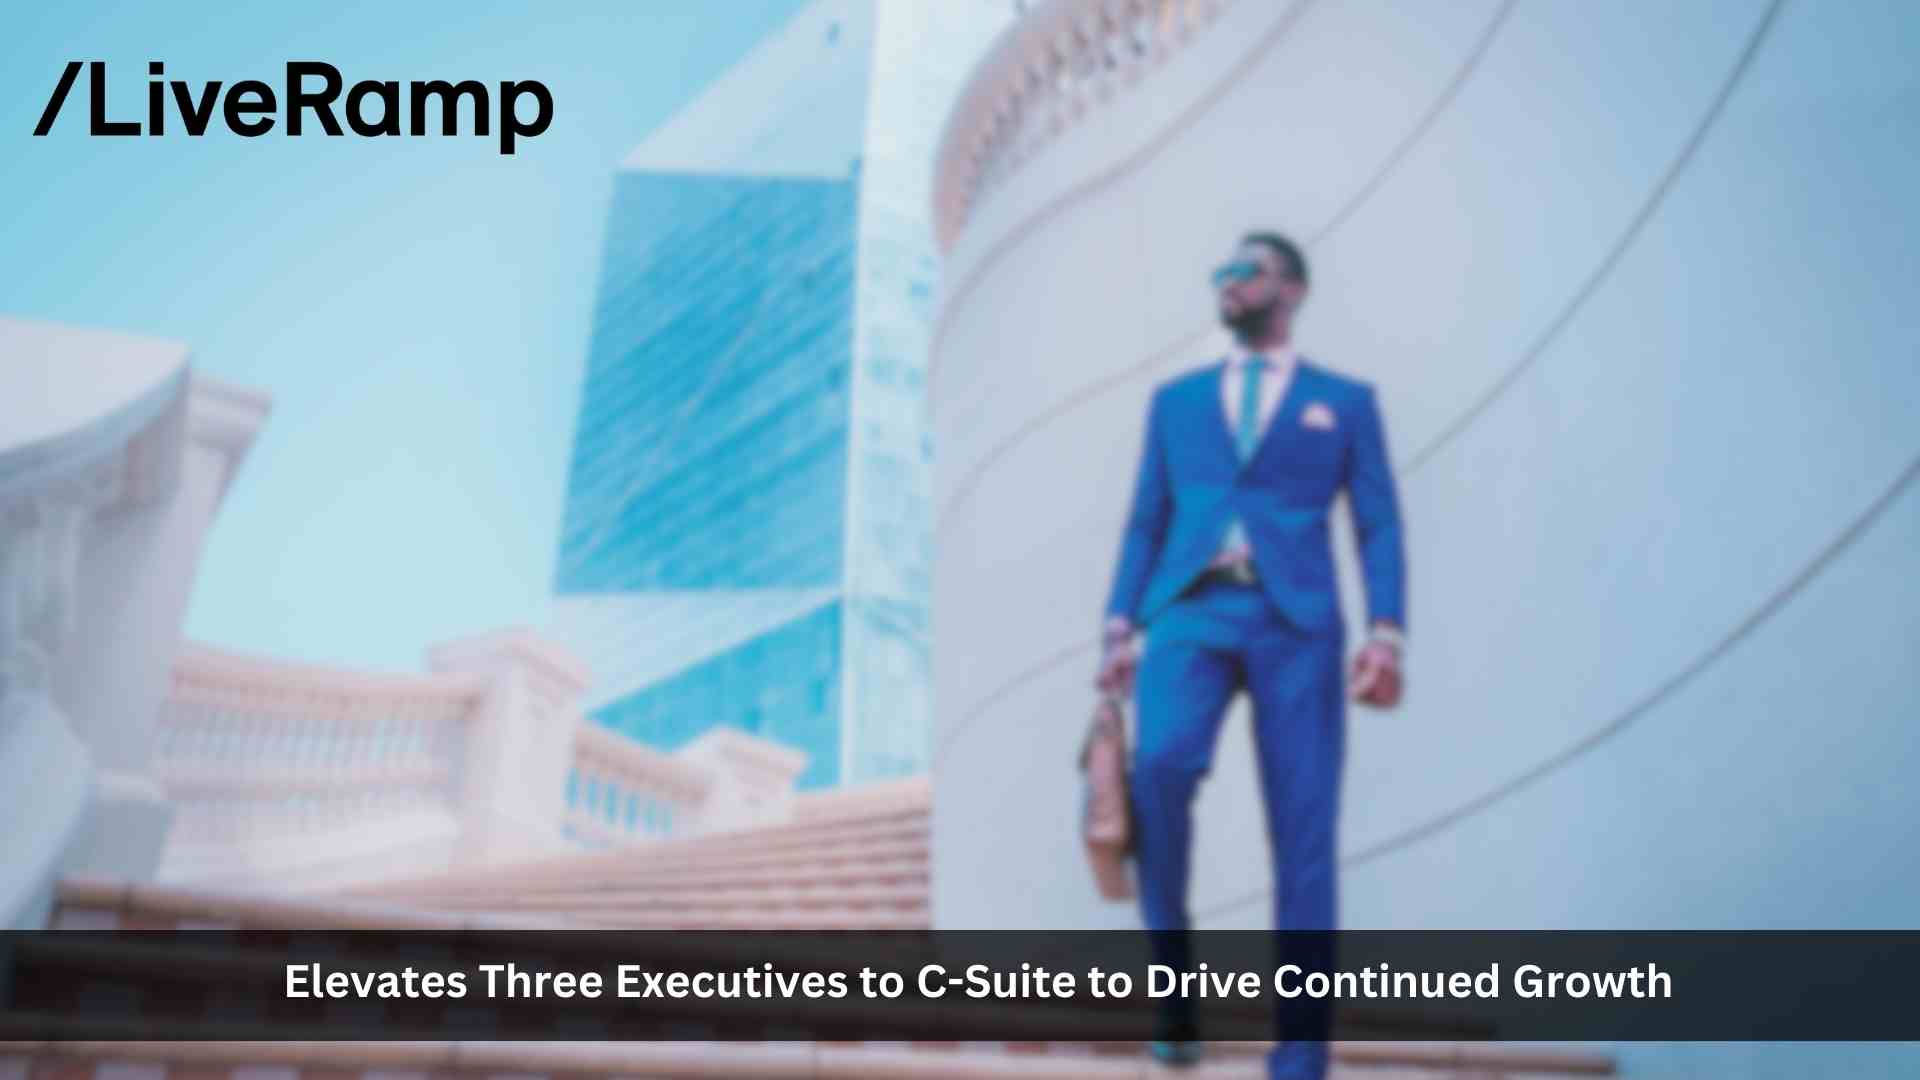 LiveRamp Elevates Three Executives to C-Suite to Drive Continued Growth